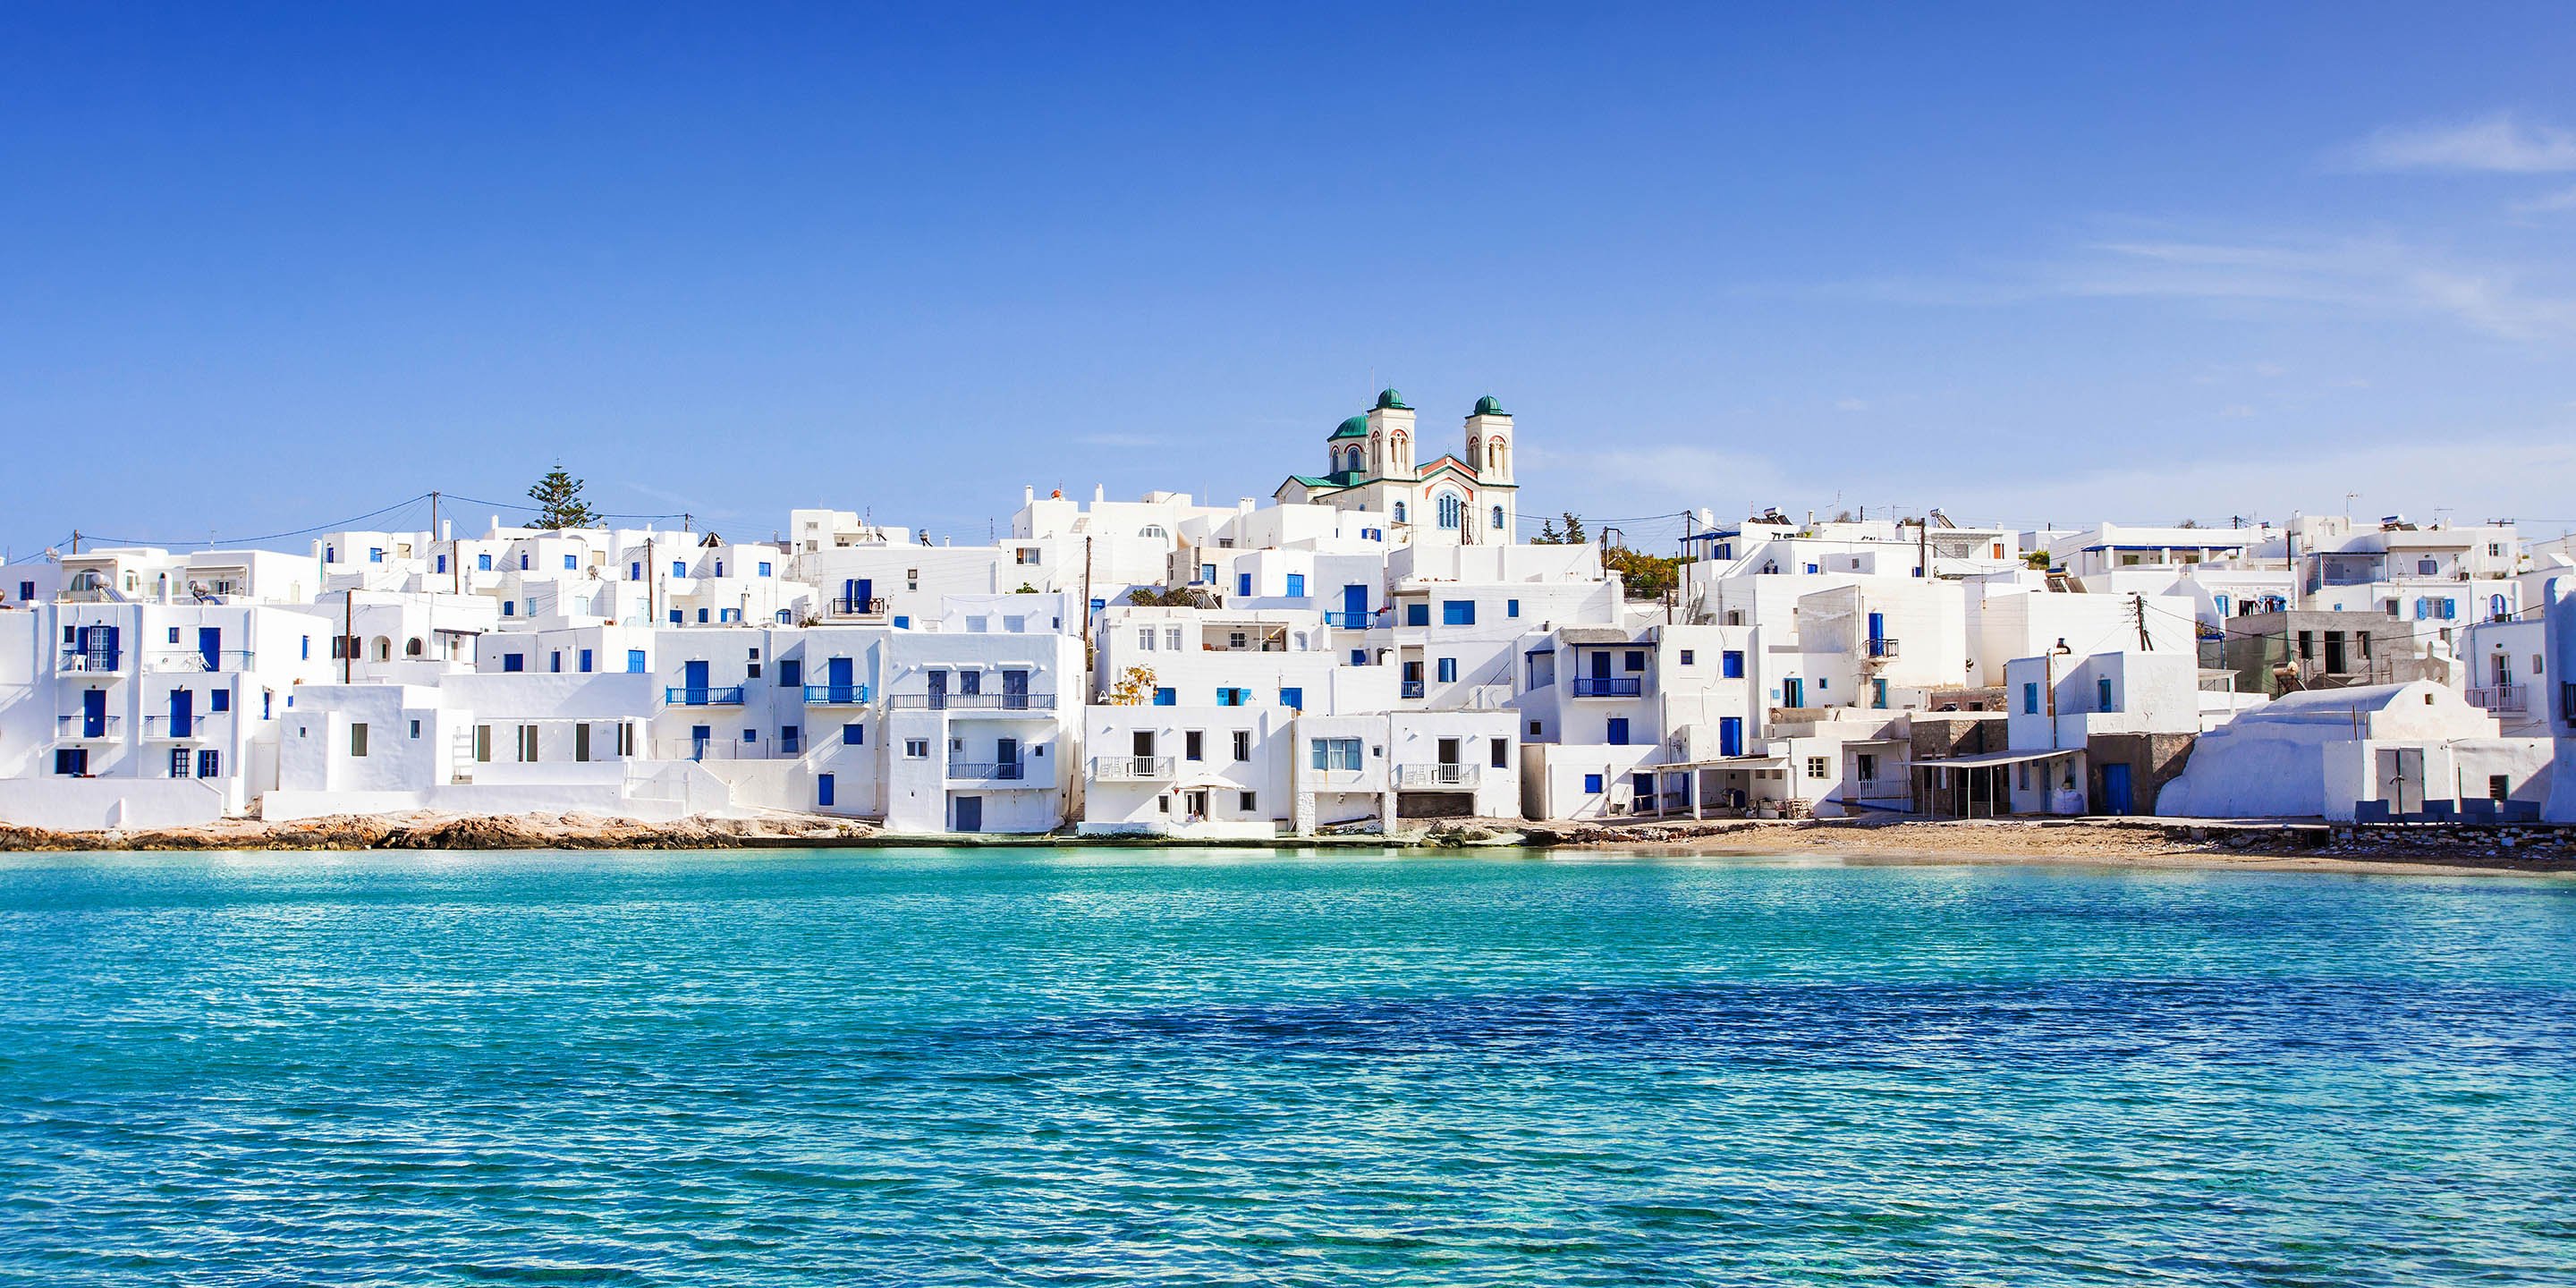 Naoussa village in Paros, and its white little houses by the sea